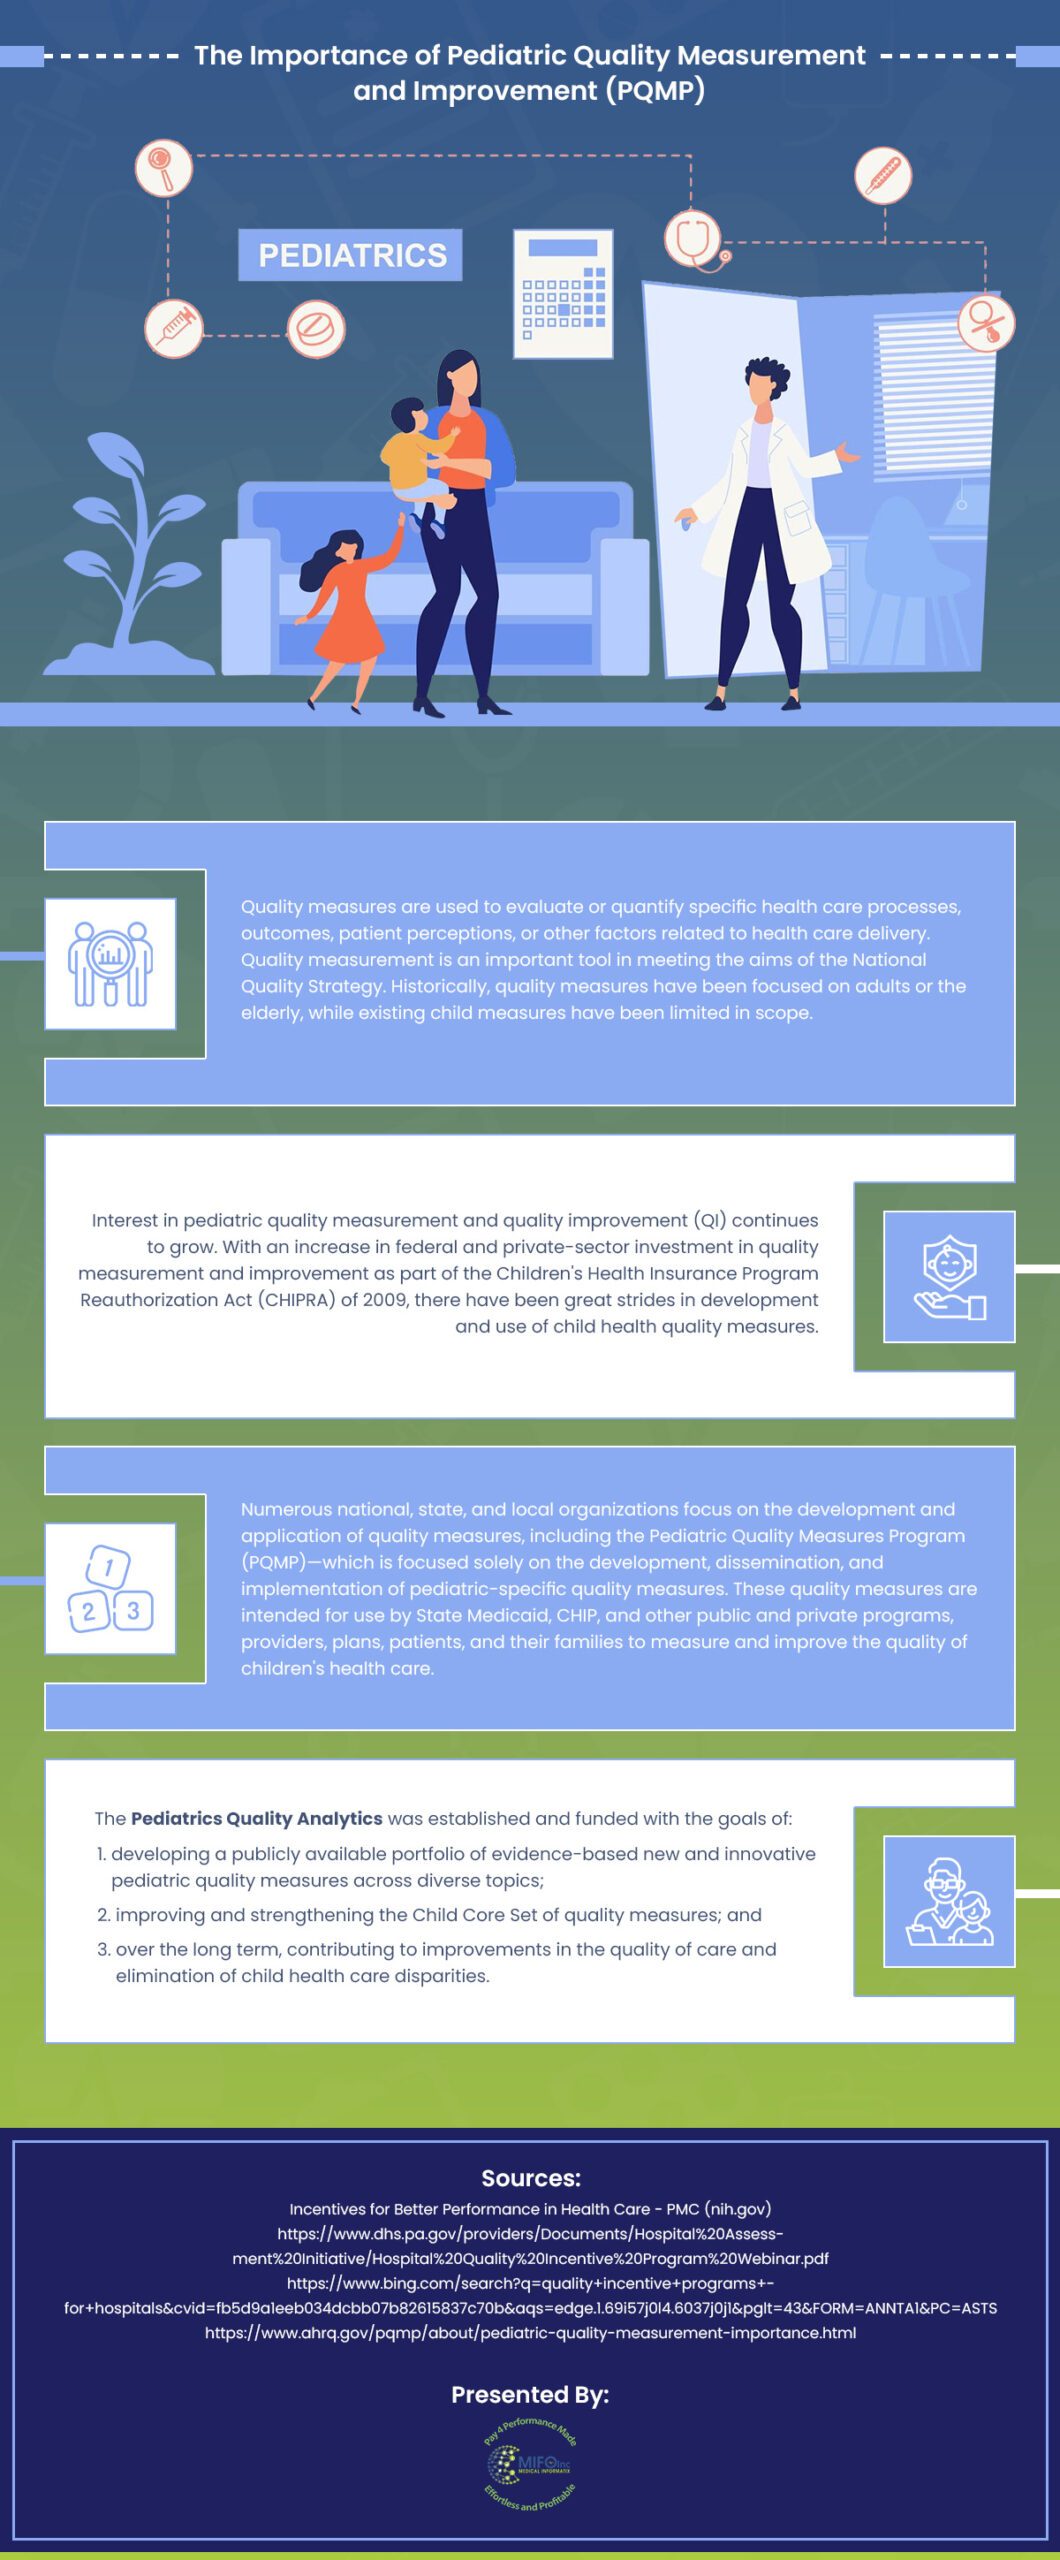 [Infographic] The Importance of Pediatric Quality Measurement and Improvement (PQMP)